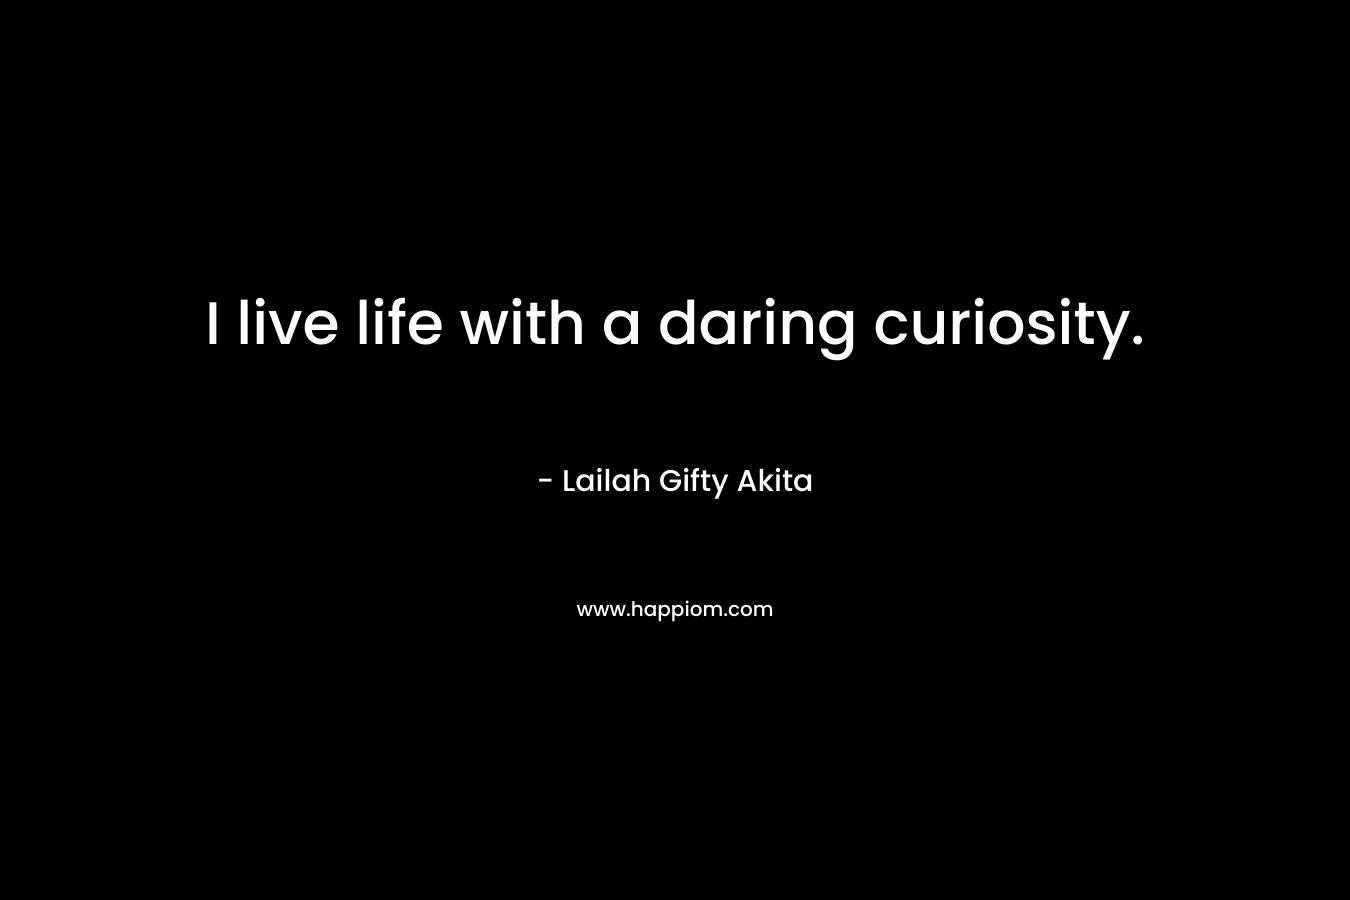 I live life with a daring curiosity.